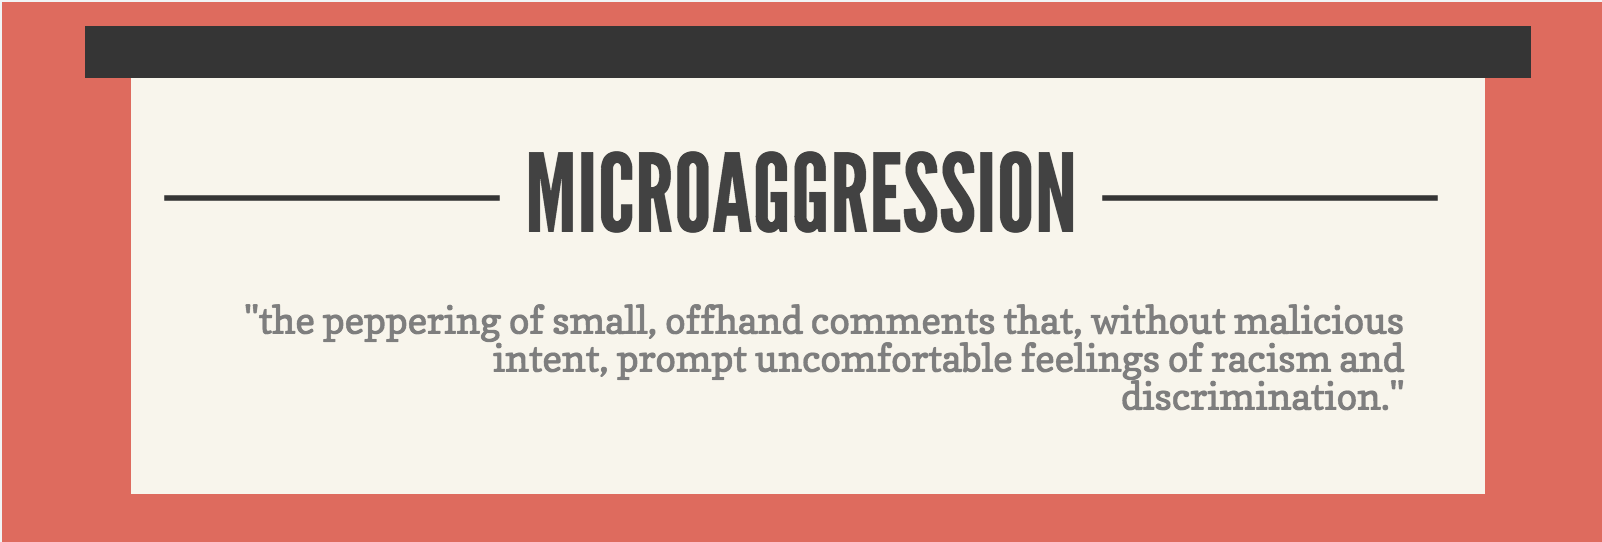 definition of microaggression